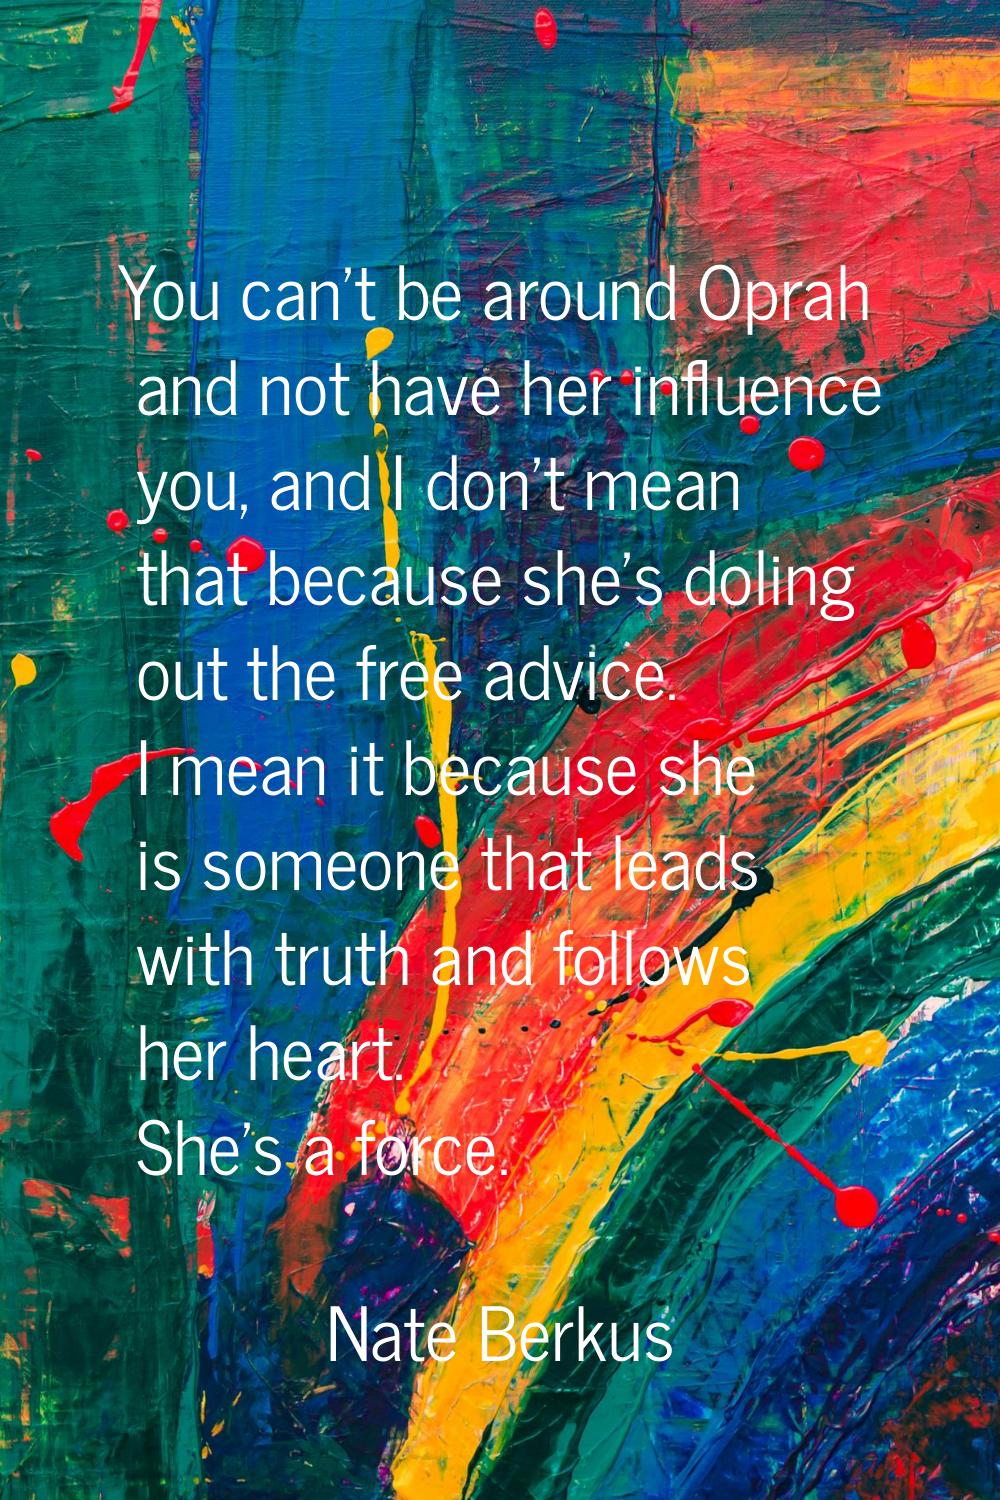 You can't be around Oprah and not have her influence you, and I don't mean that because she's dolin